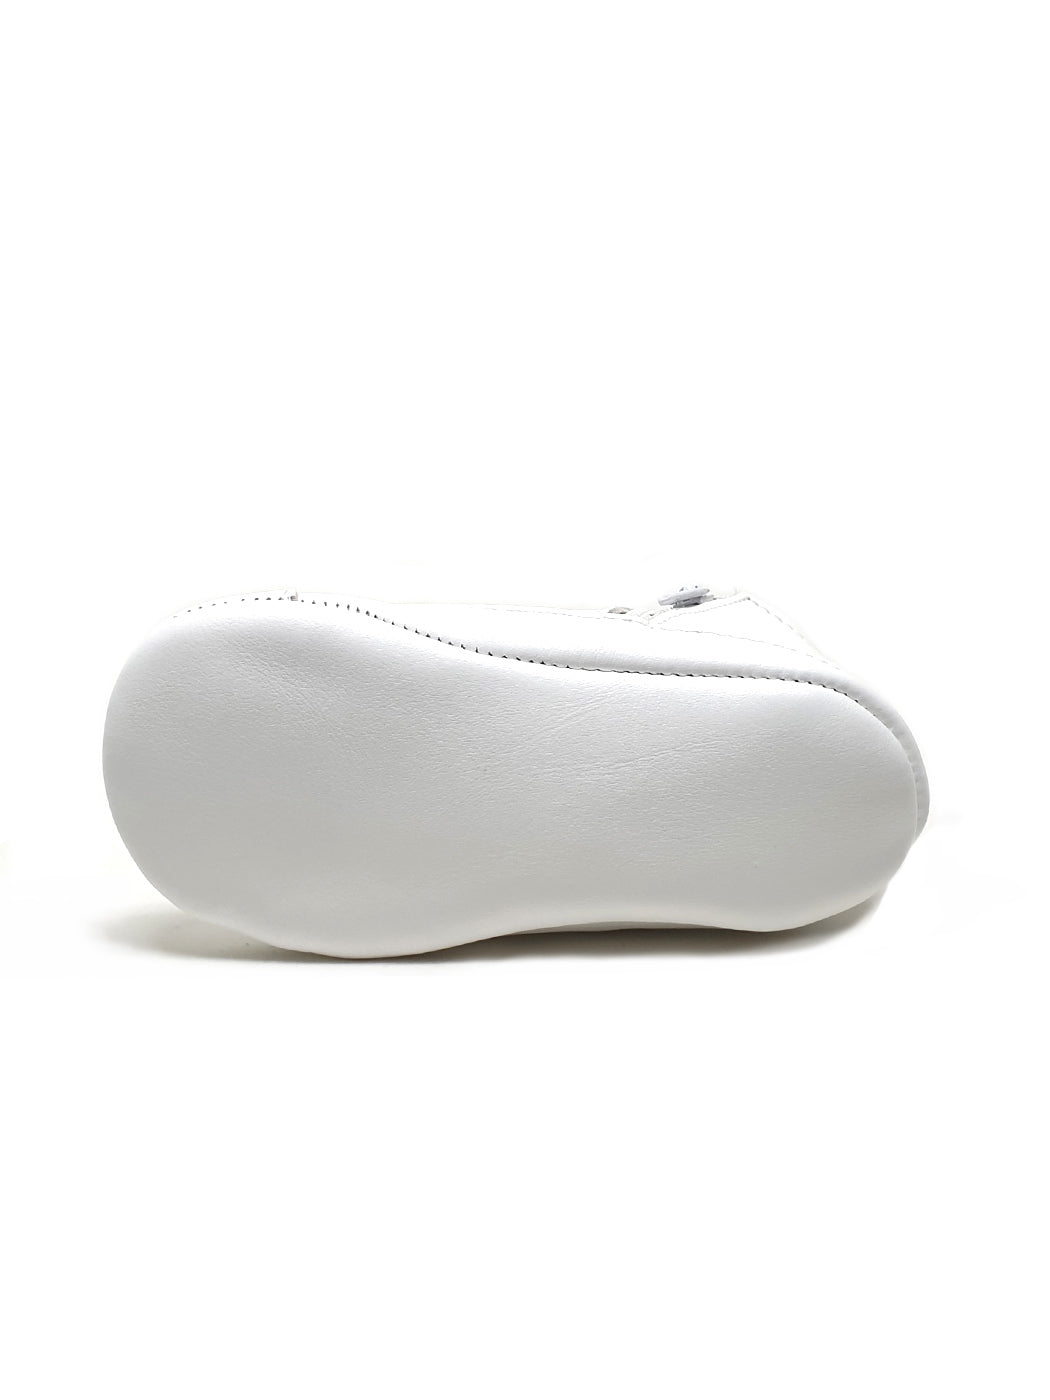 Baptismal leather booties for baby-PR-M128